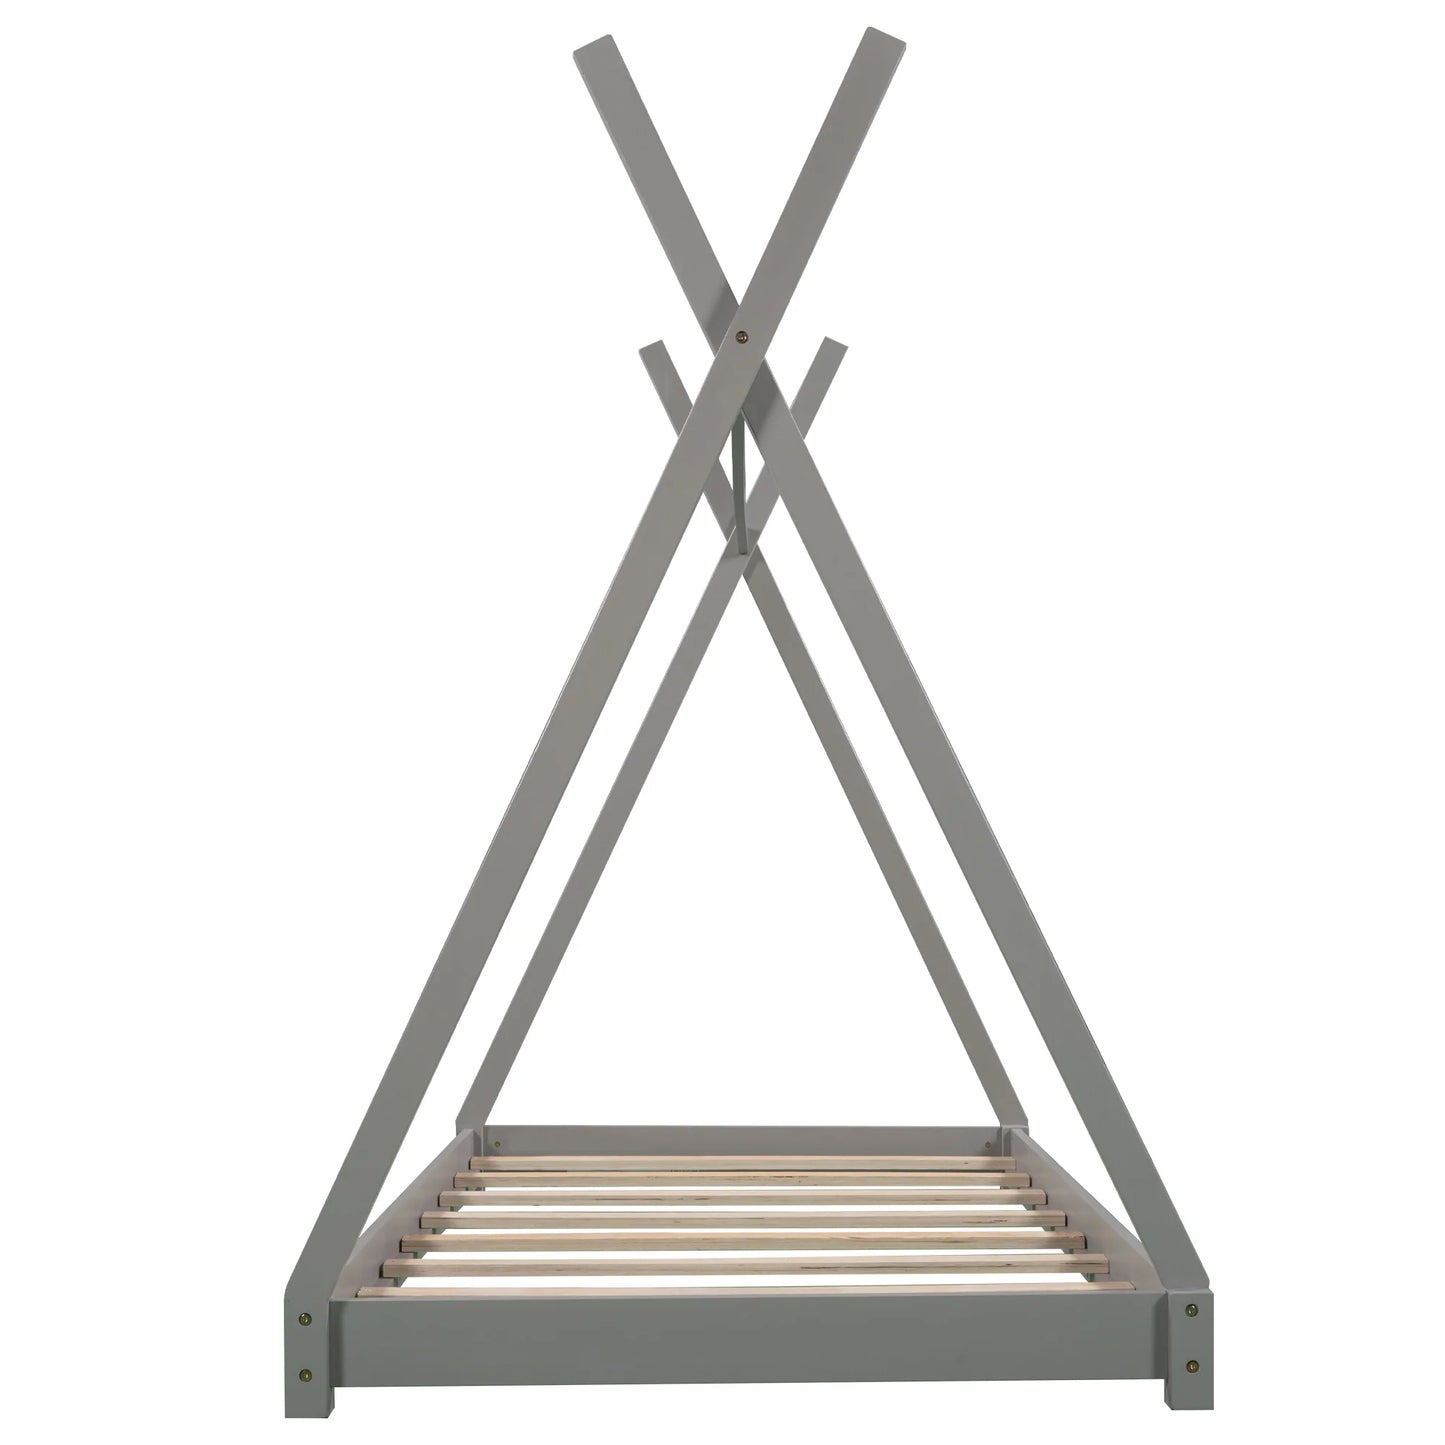 House Platform Bed with Triangle Structure in Gray